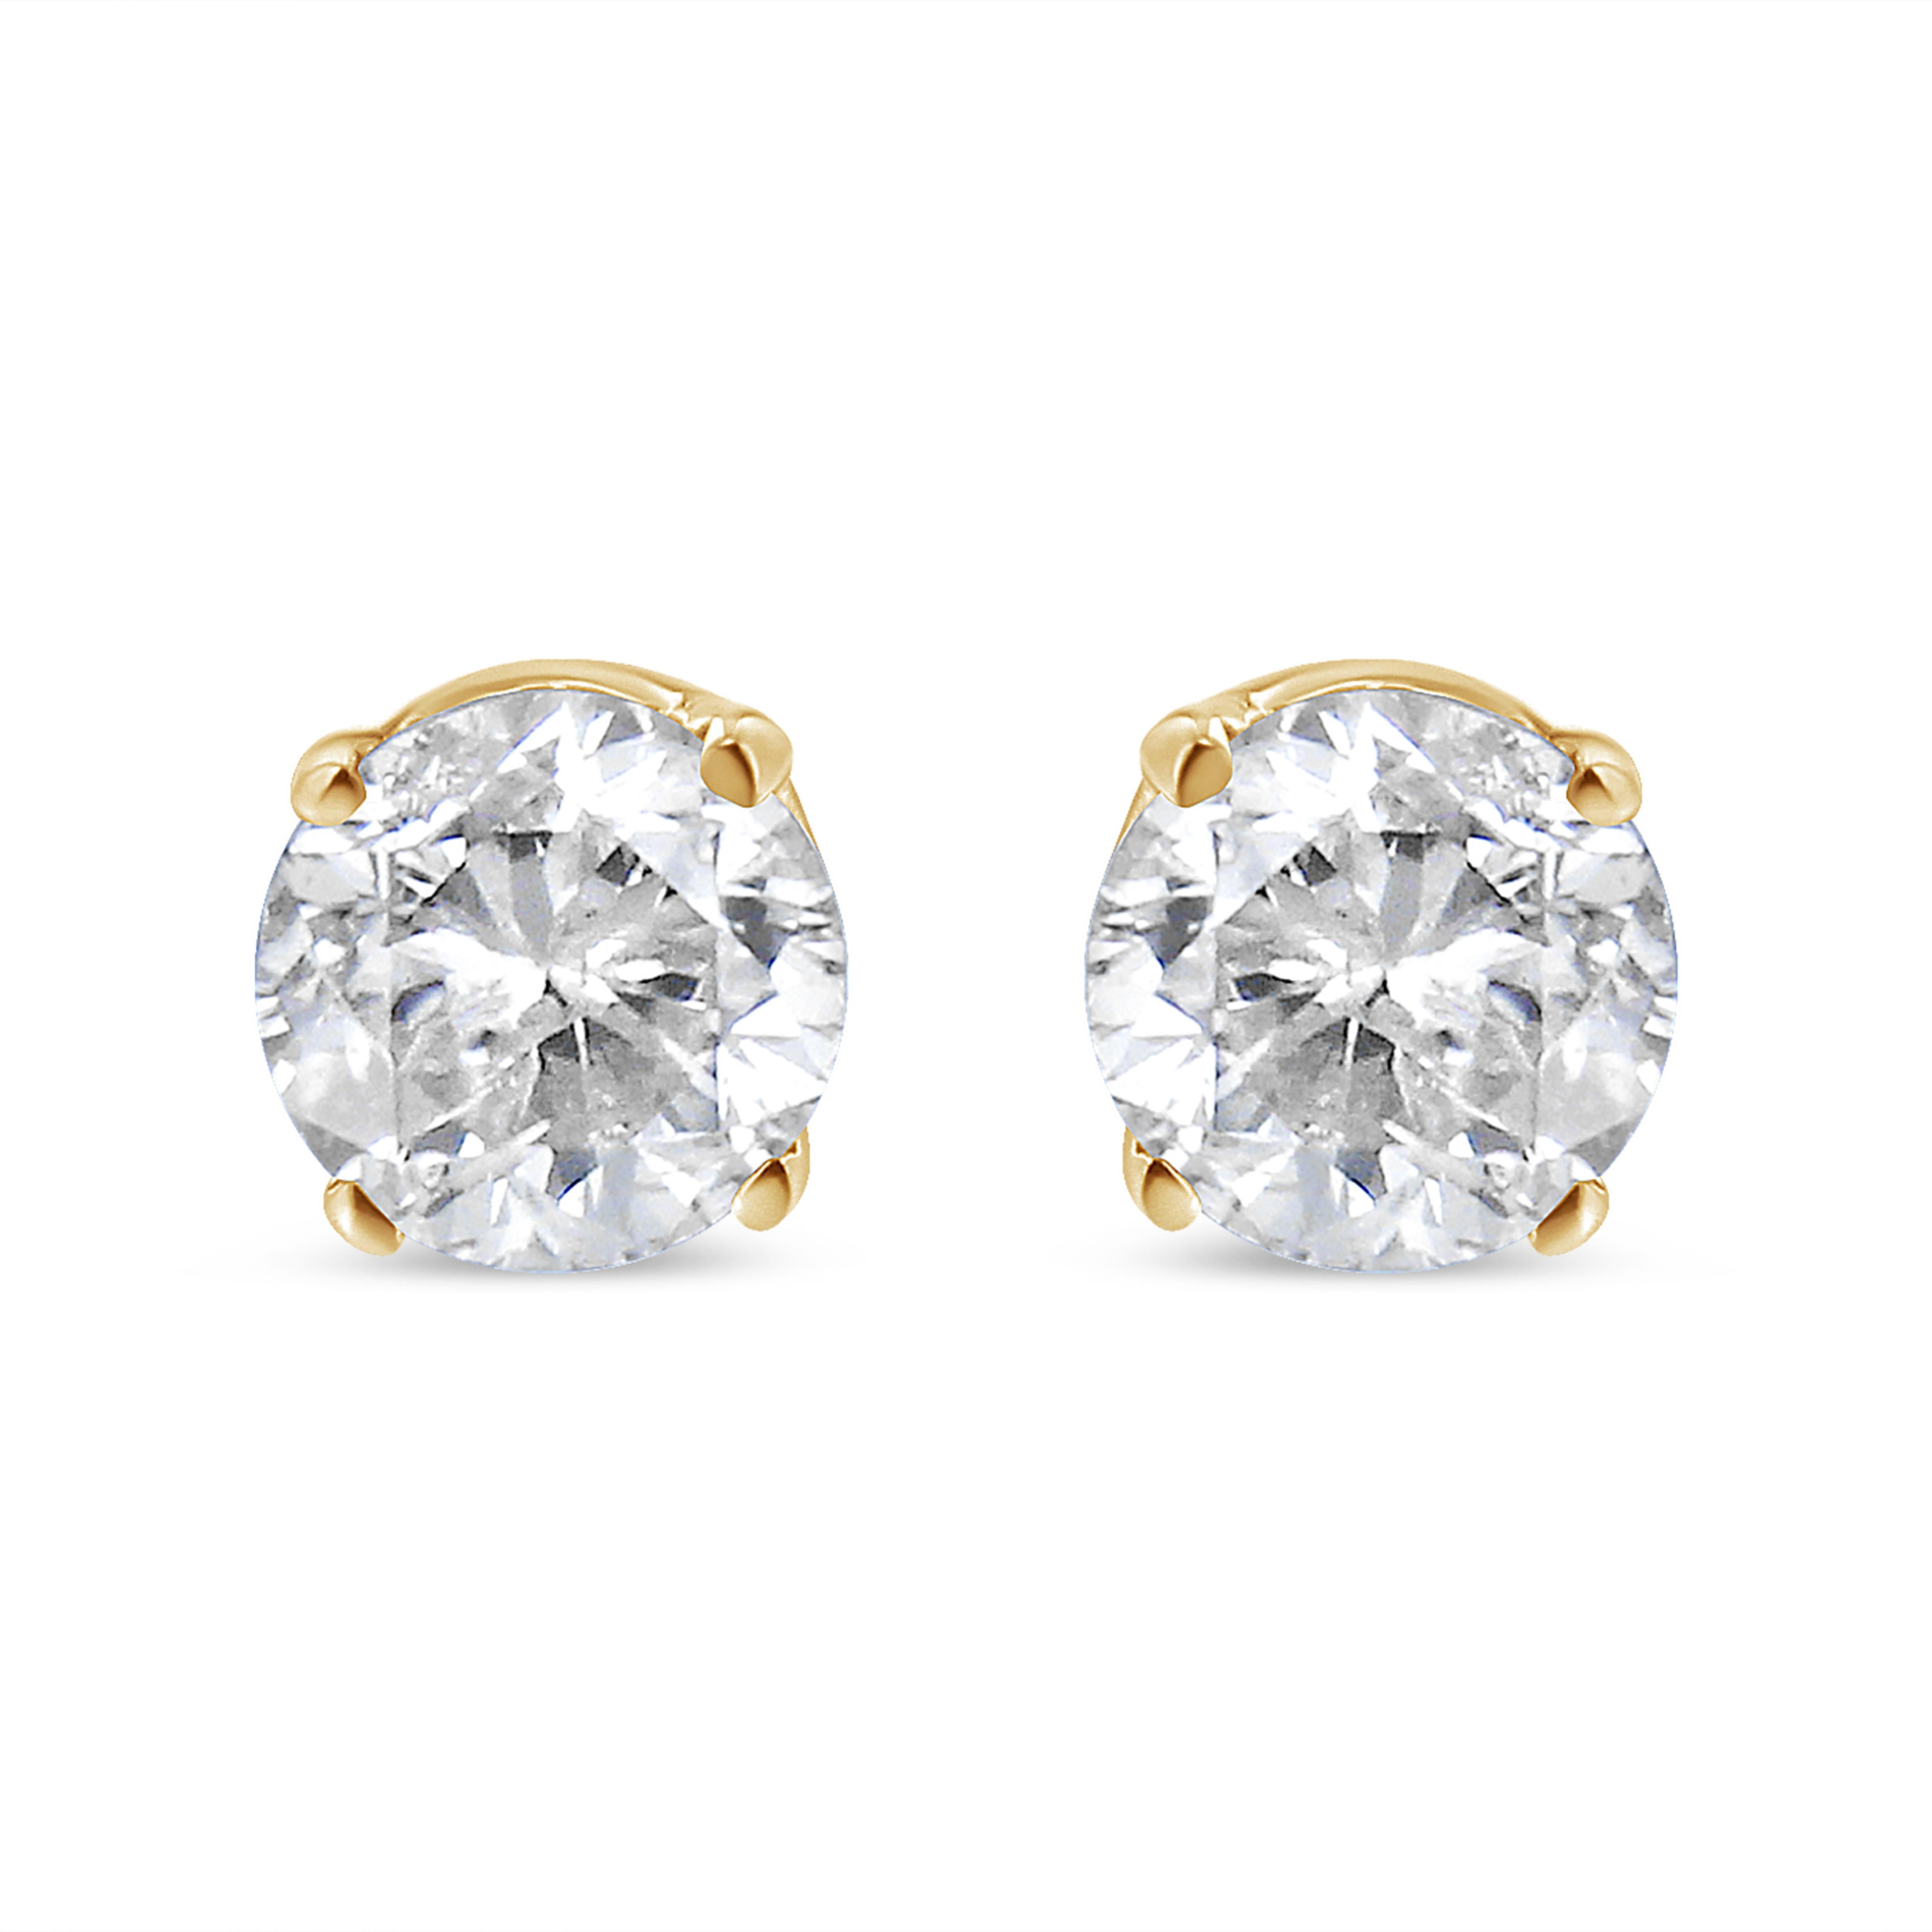 Celebrate any occasion with these classic shimmering diamond stud earrings. Fashioned in 14K yellow gold, each earring showcases a sparkling round, brilliant cut diamond solitaire. Dazzling with a bright polished shine, these post earrings secure